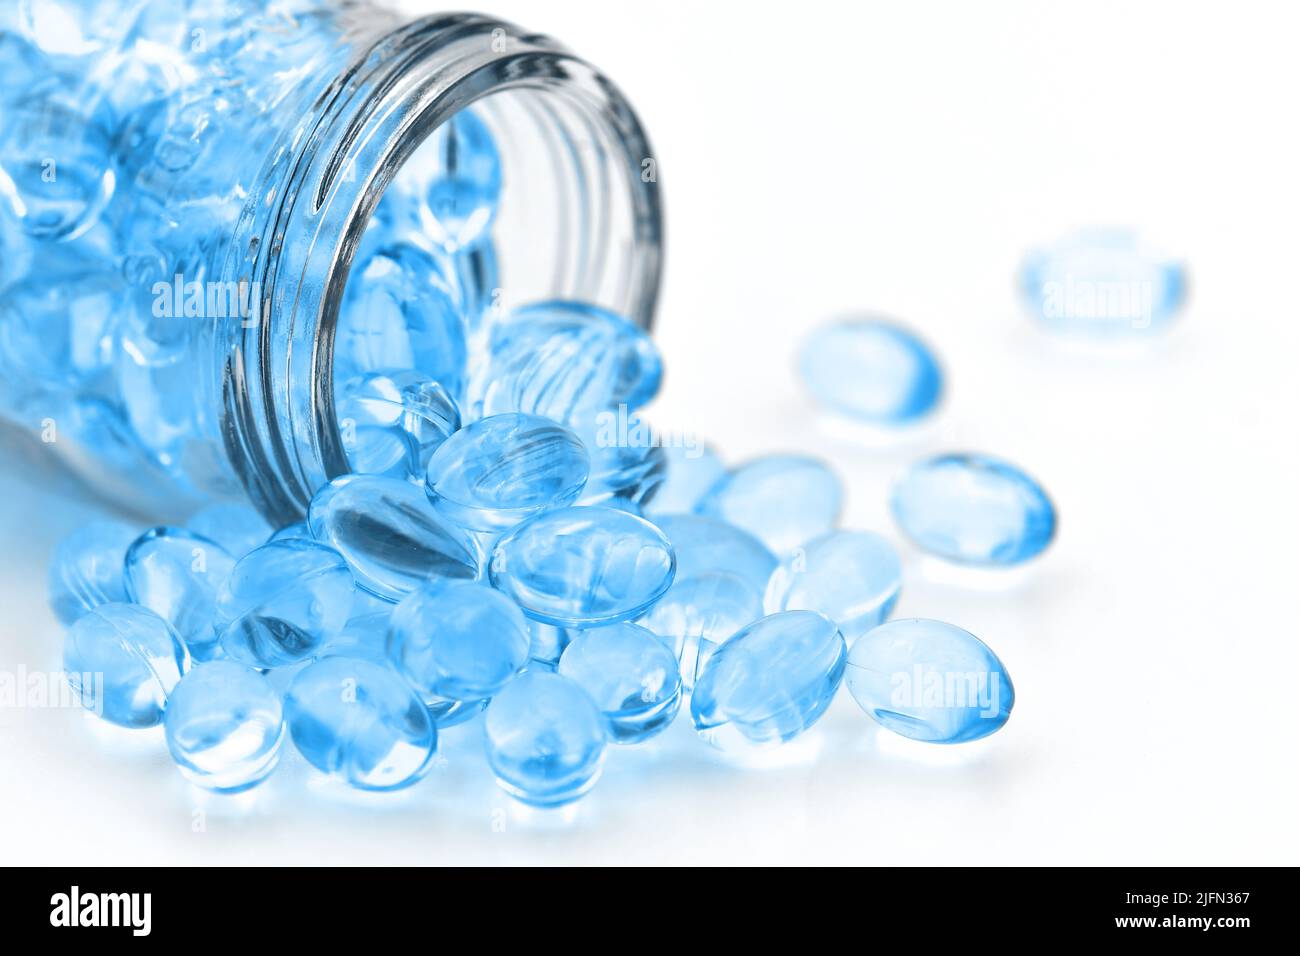 Small oval shaped of oil soft gelatin capsules in blue tone on white background. Stock Photo